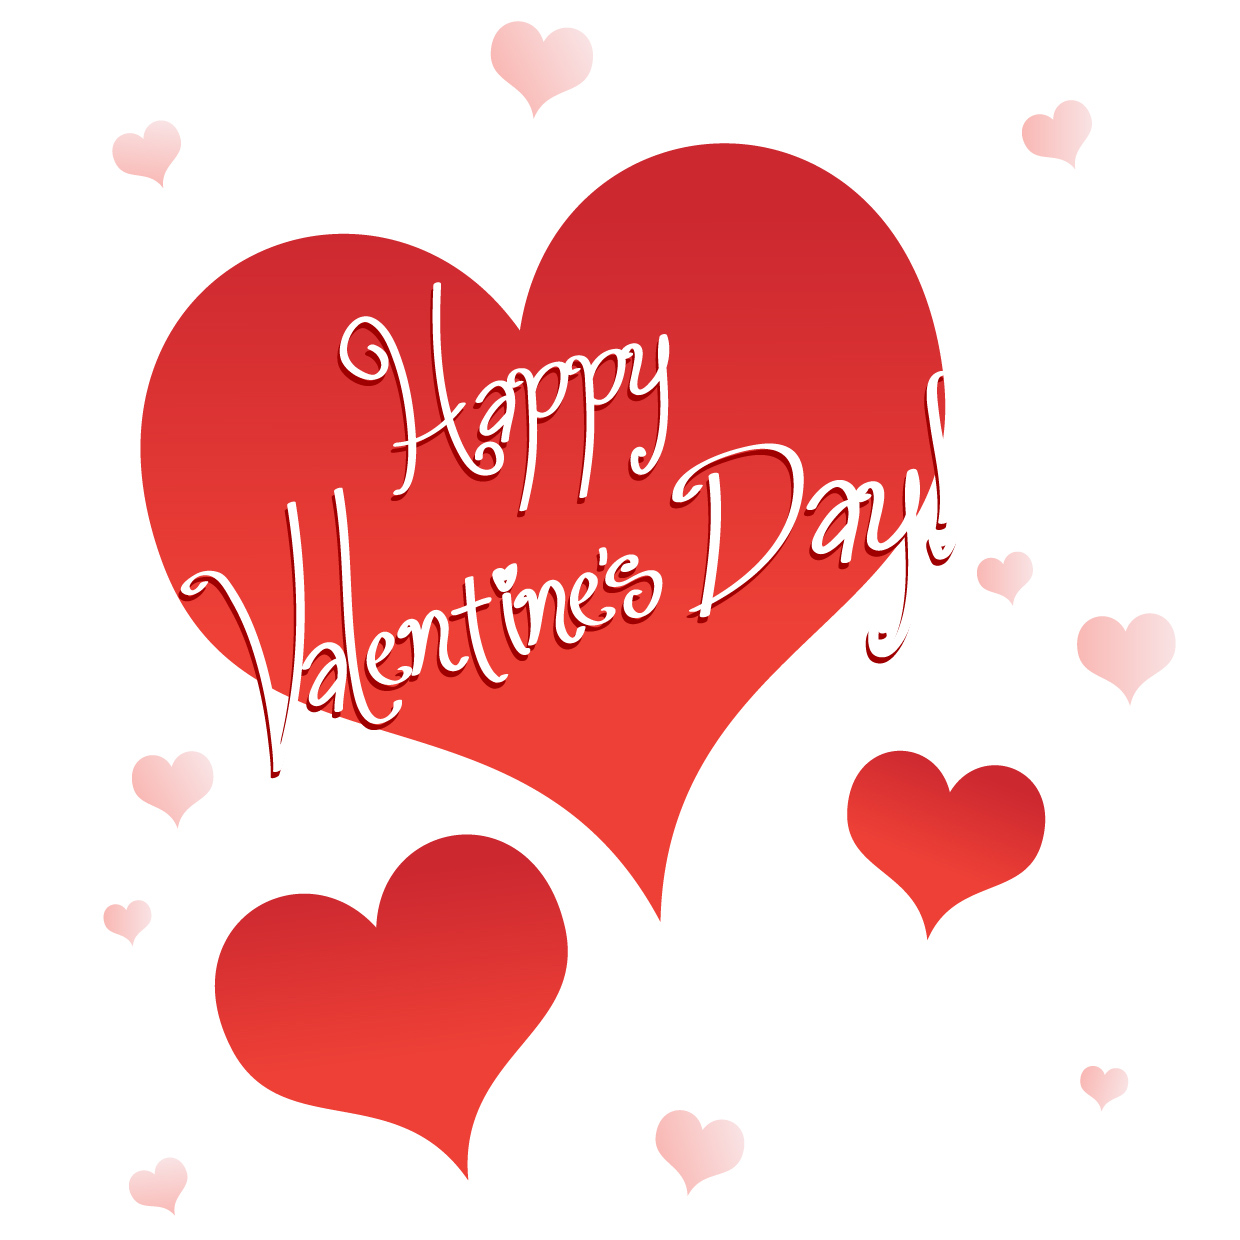 Happy valentines day clip art for love share submit download